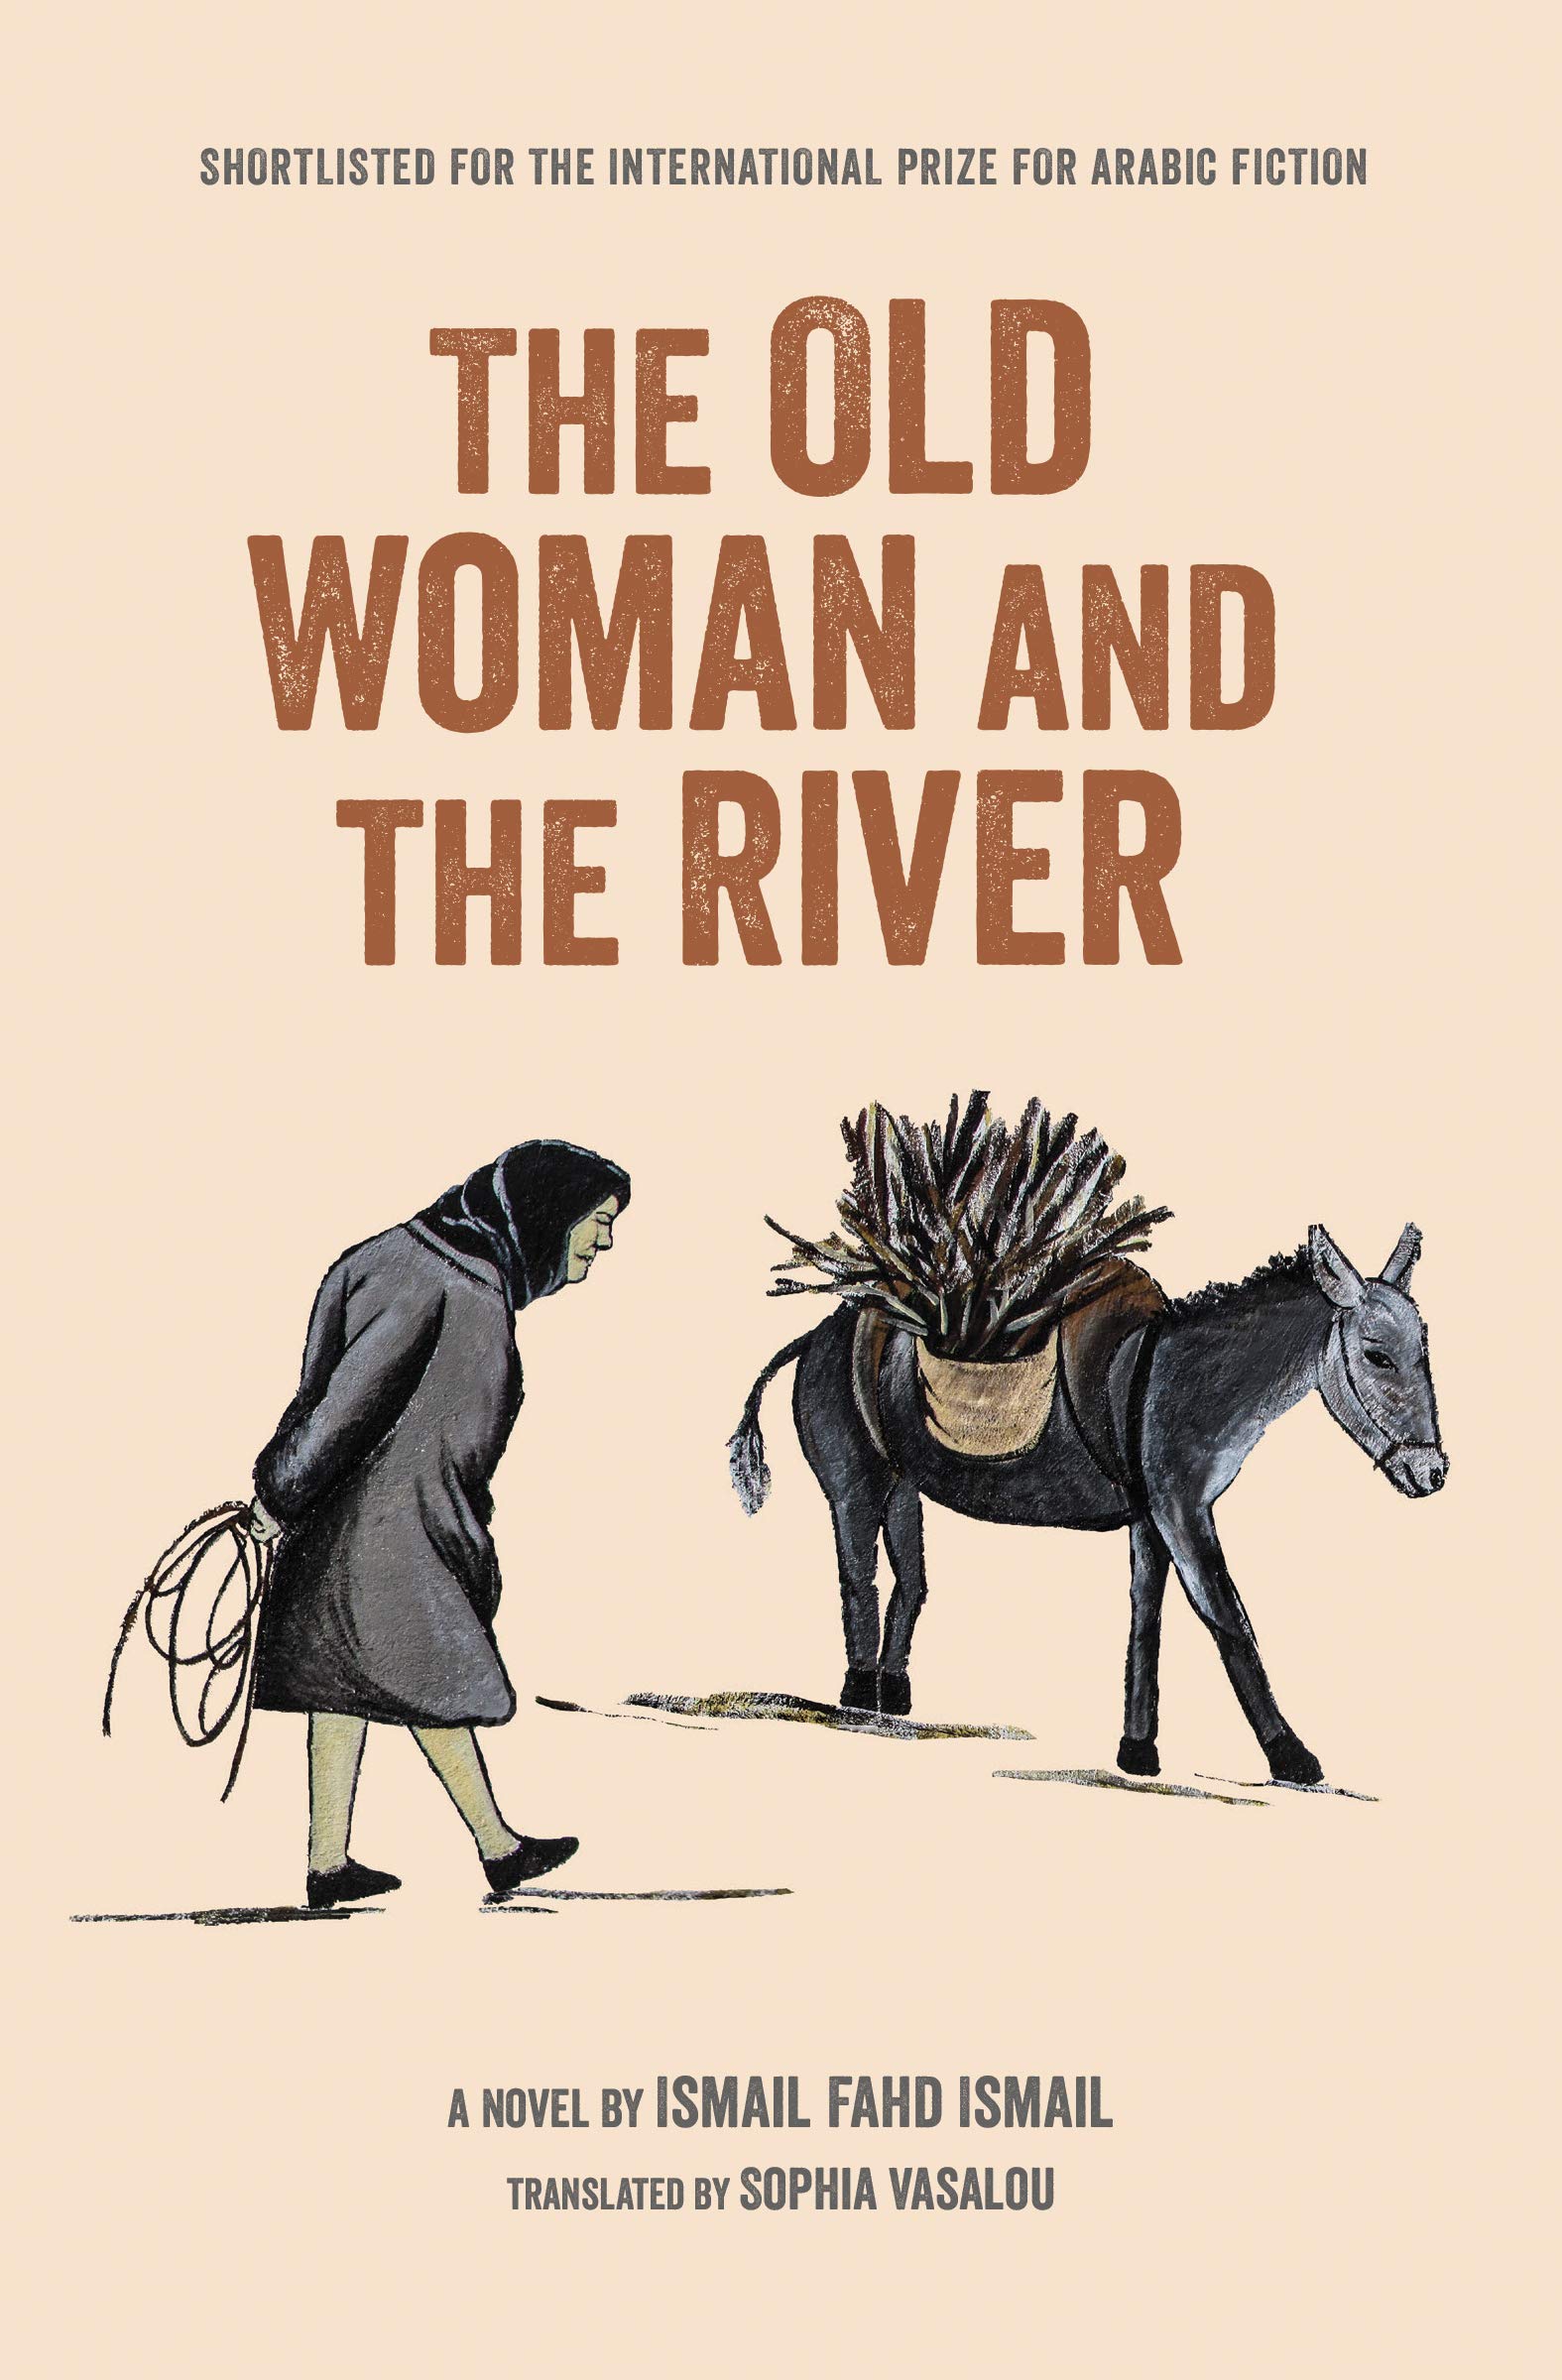 Cover of Ismail Fahd Ismail's "The Old Woman and the River", translated into English by Sophia Vasalou (published by Interlink)